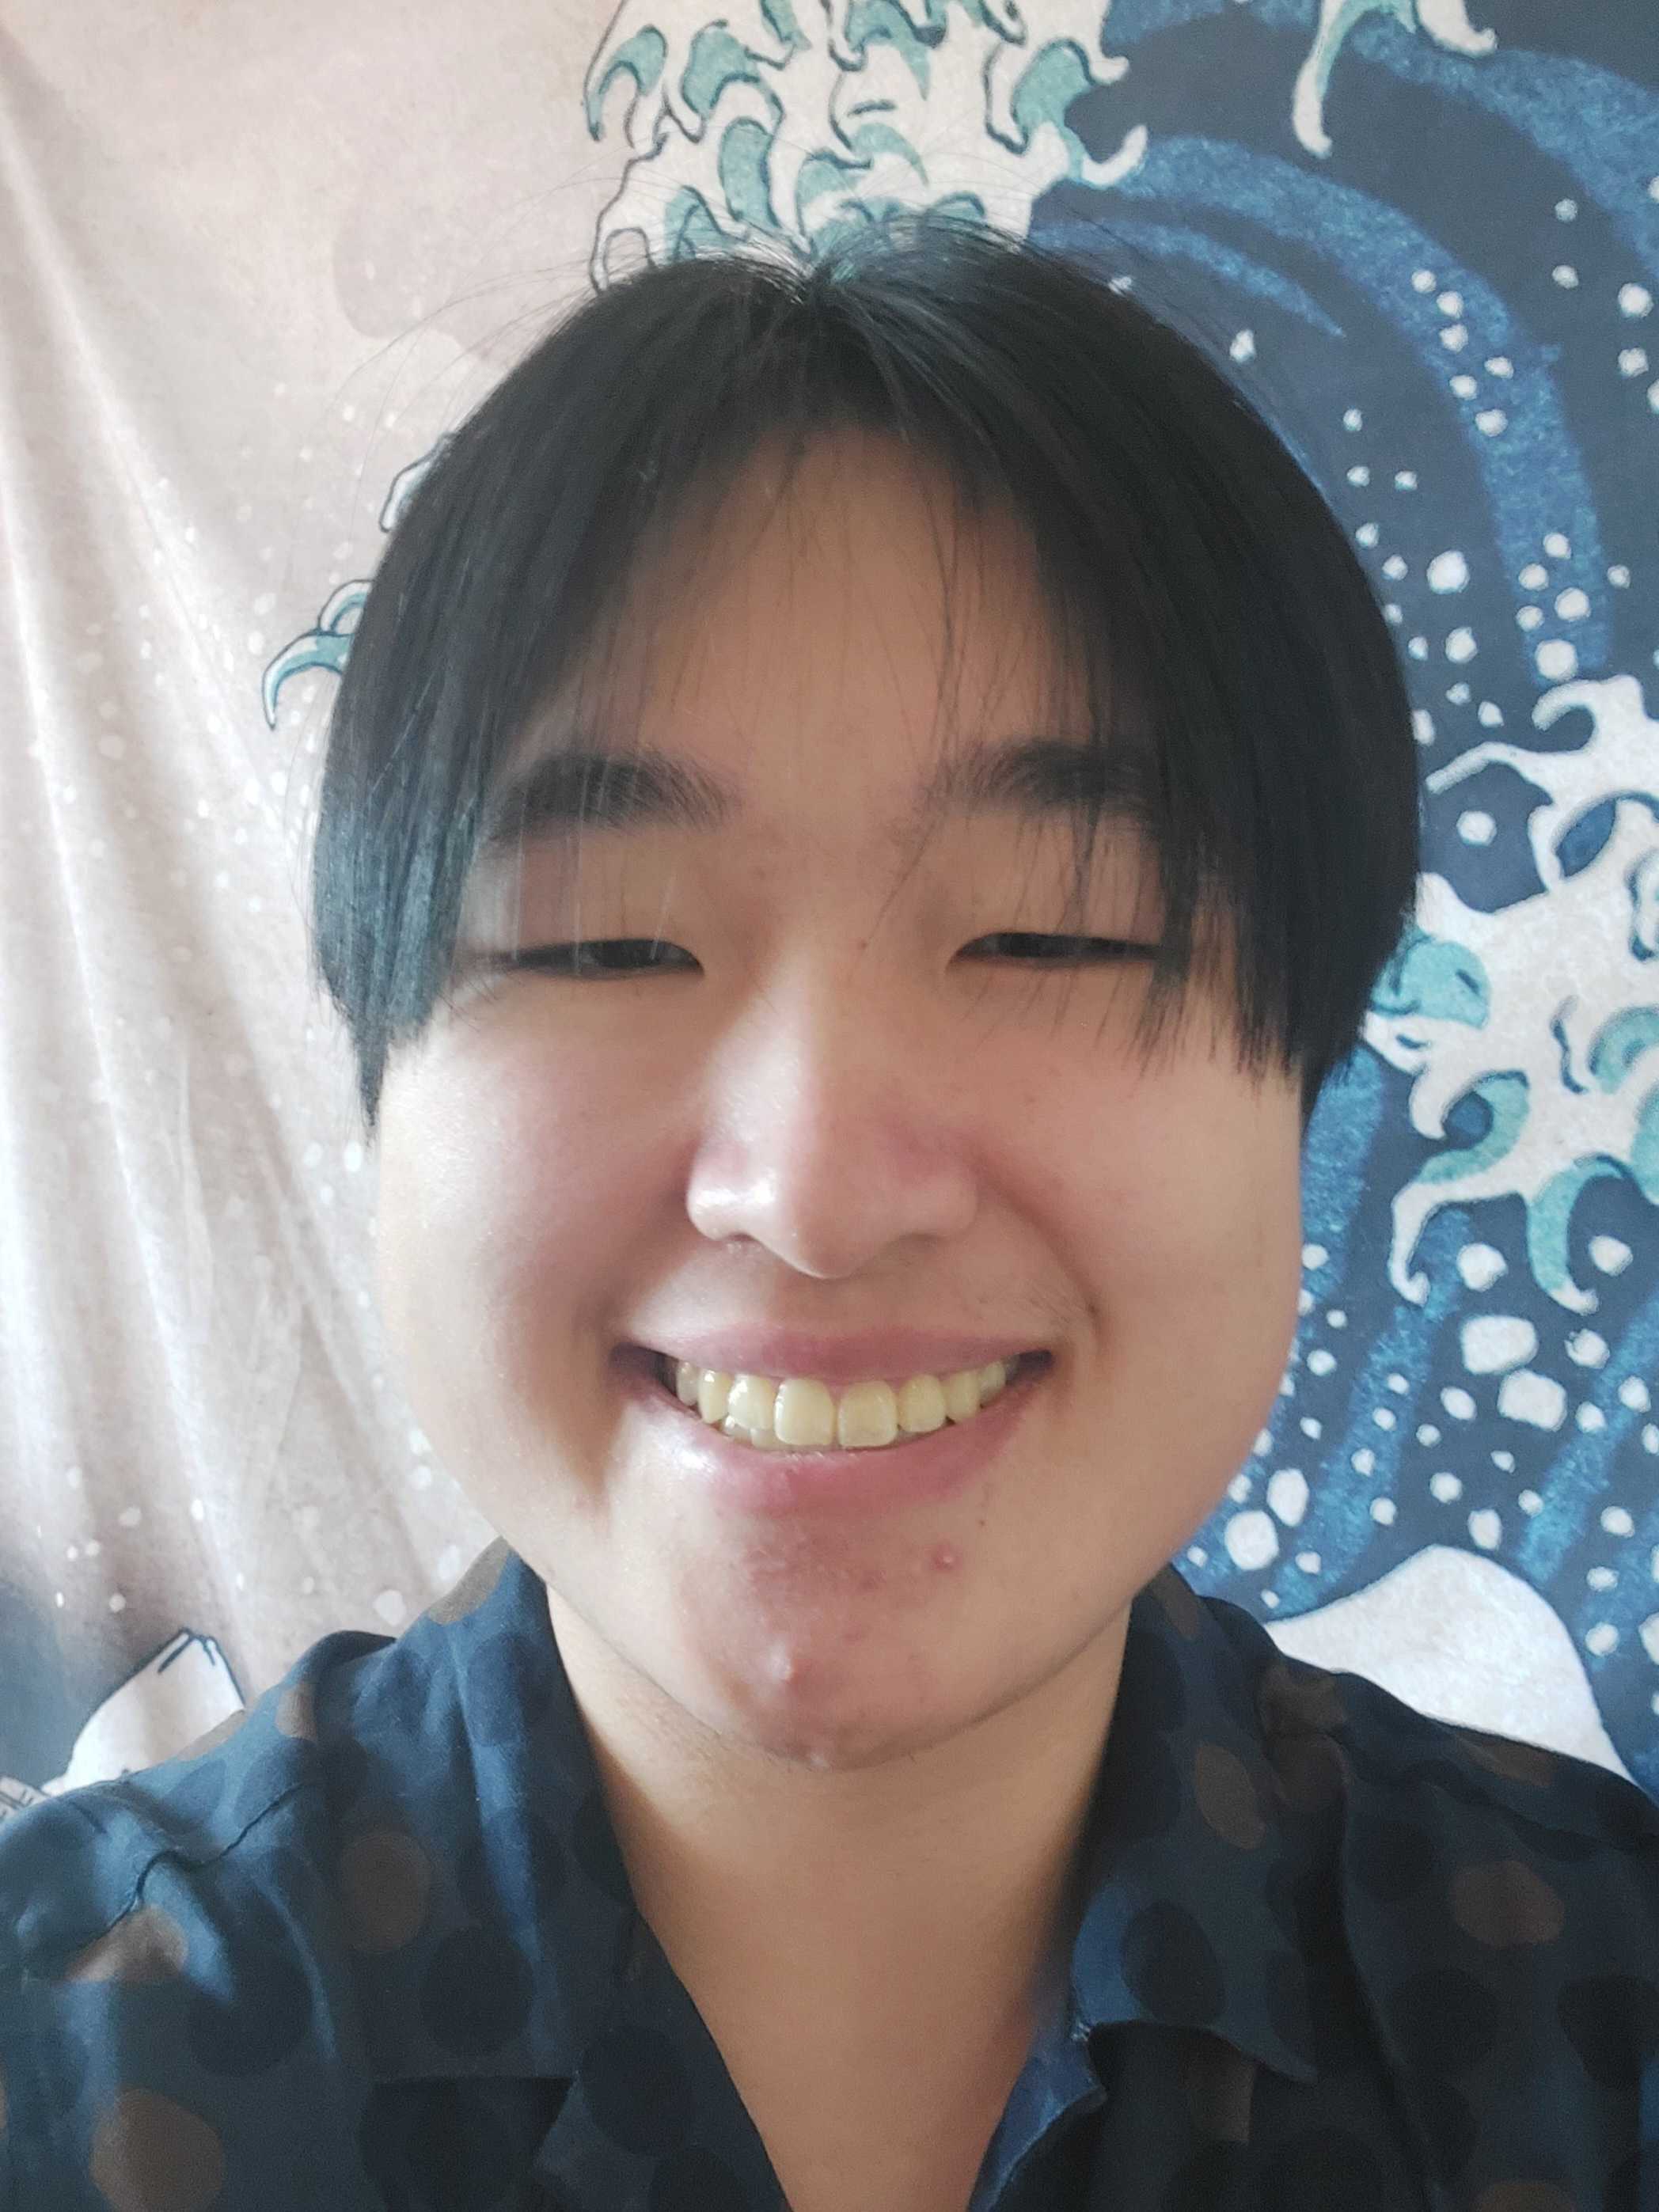 An image of Kelly Wang, who has short, straight black hair down to their cheekbones and is wearing a dark blue collared shirt. He is smiling in front of a tapestry of the Great Wave Off Kanagawa.